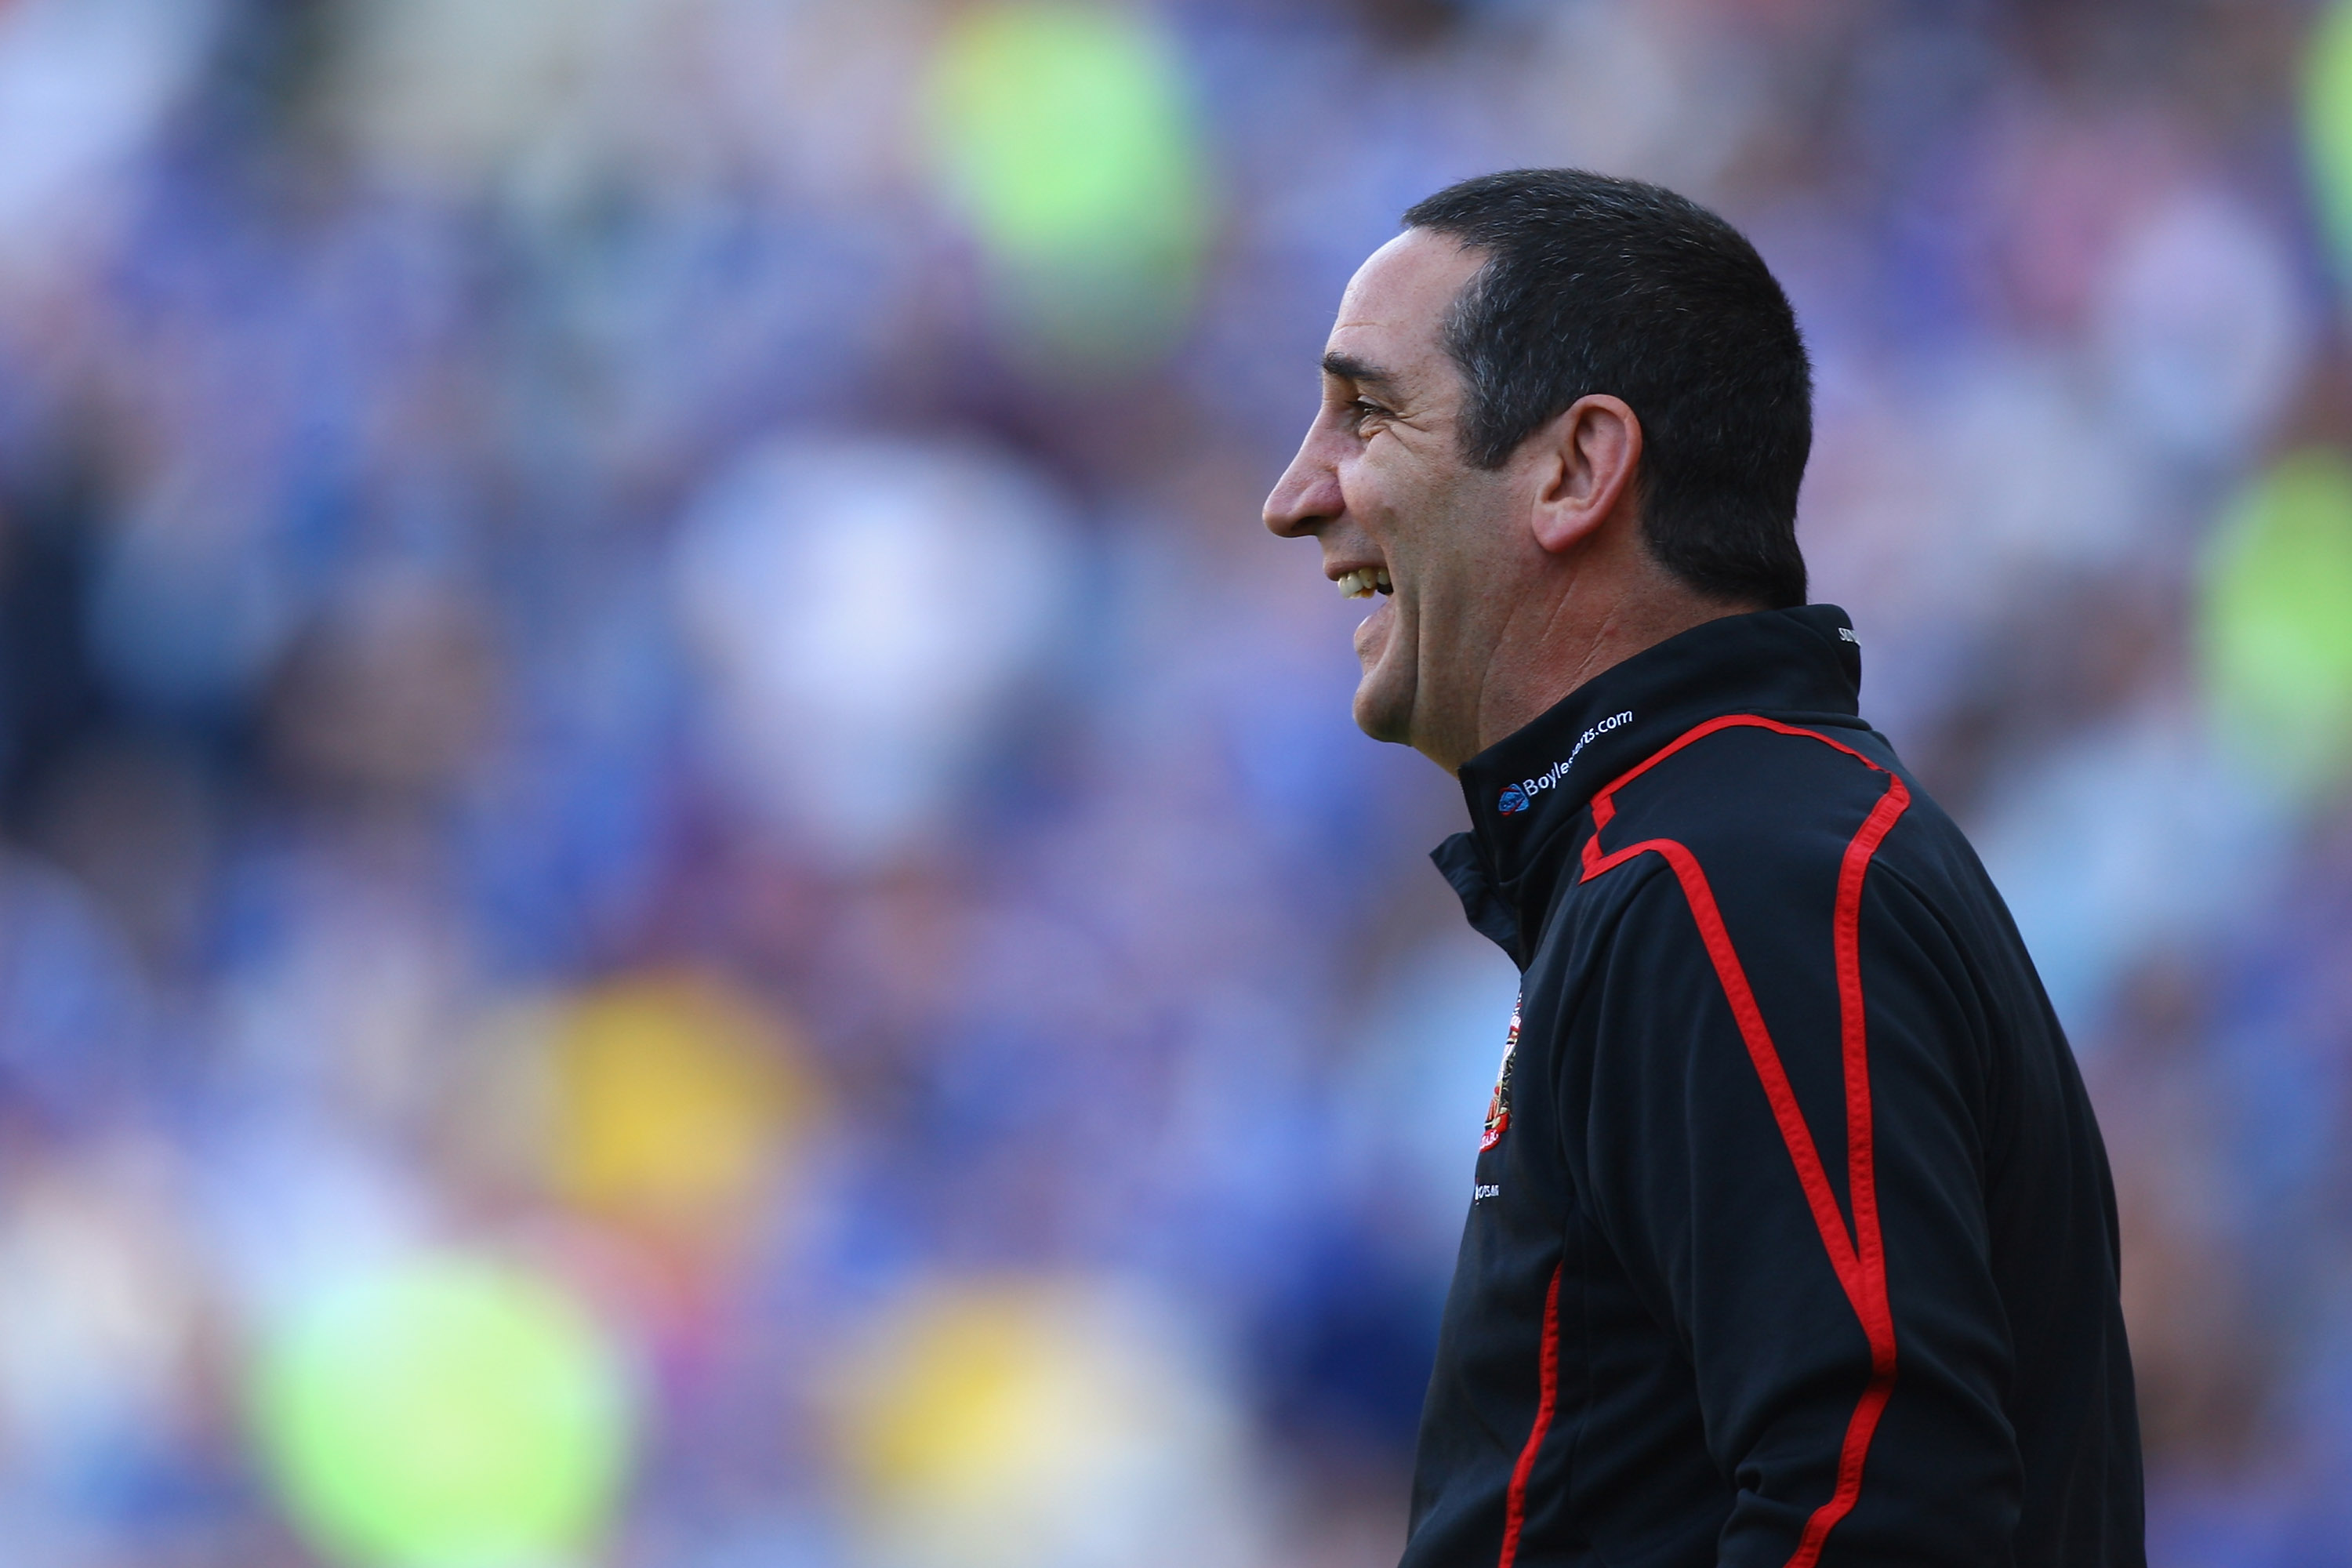 SUNDERLAND, ENGLAND - MAY 24:  Sunderland Manager Ricky Sbragia smiles during the Barclays Premier League match between Sunderland and Chelsea at The Stadium of Light on May 24, 2009 in Sunderland, England.  (Photo by Matthew Lewis/Getty Images)